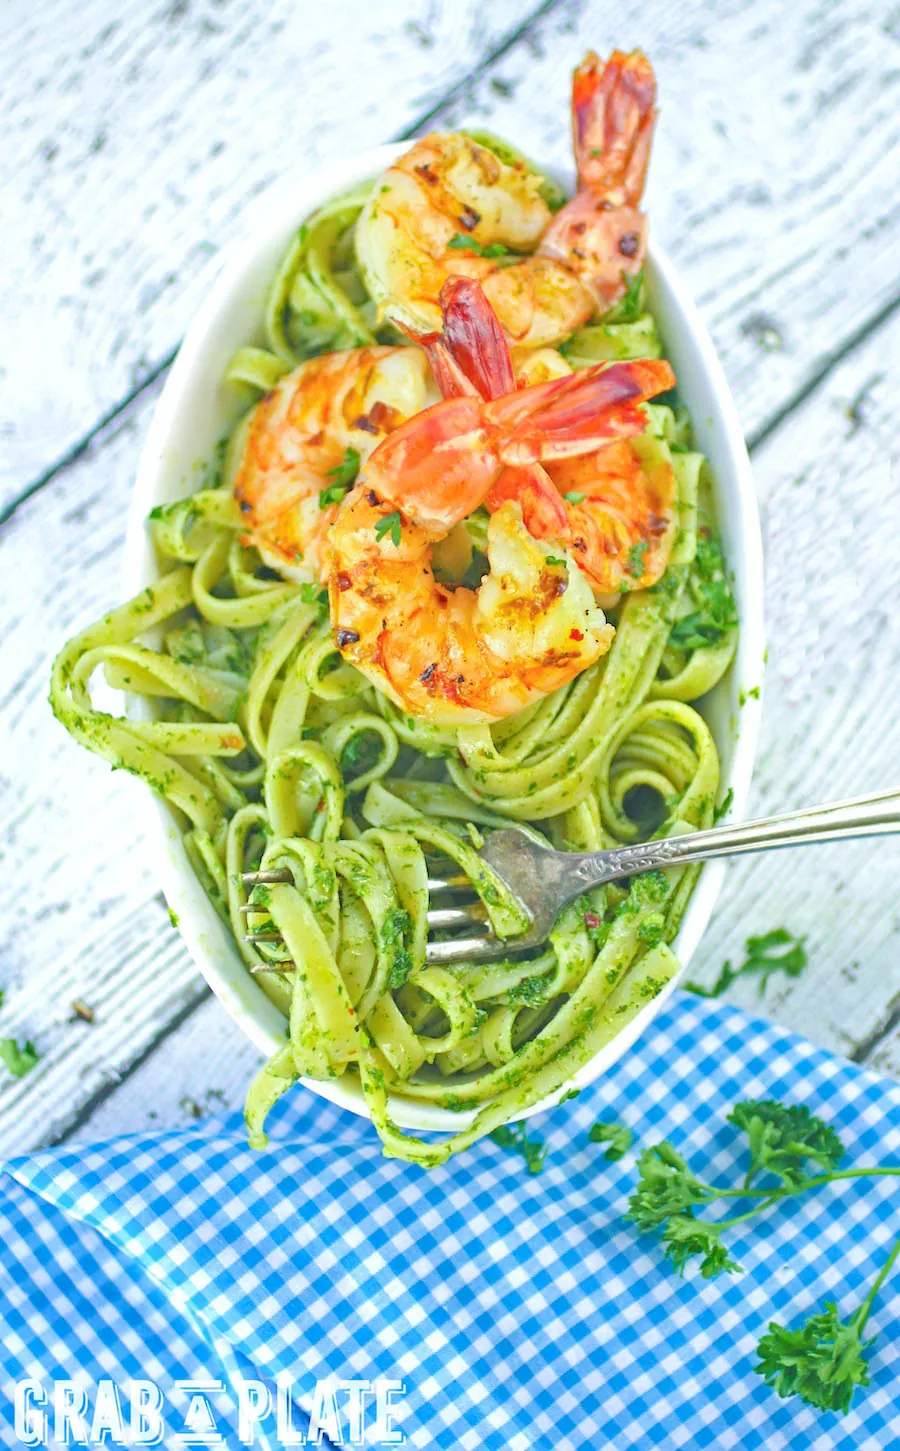 Chimichurri Pasta with Grilled Spicy Shrimp is a simple, flavorful dish. You'll enjoy Chimichurri Pasta with Grilled Spicy Shrimp any night.